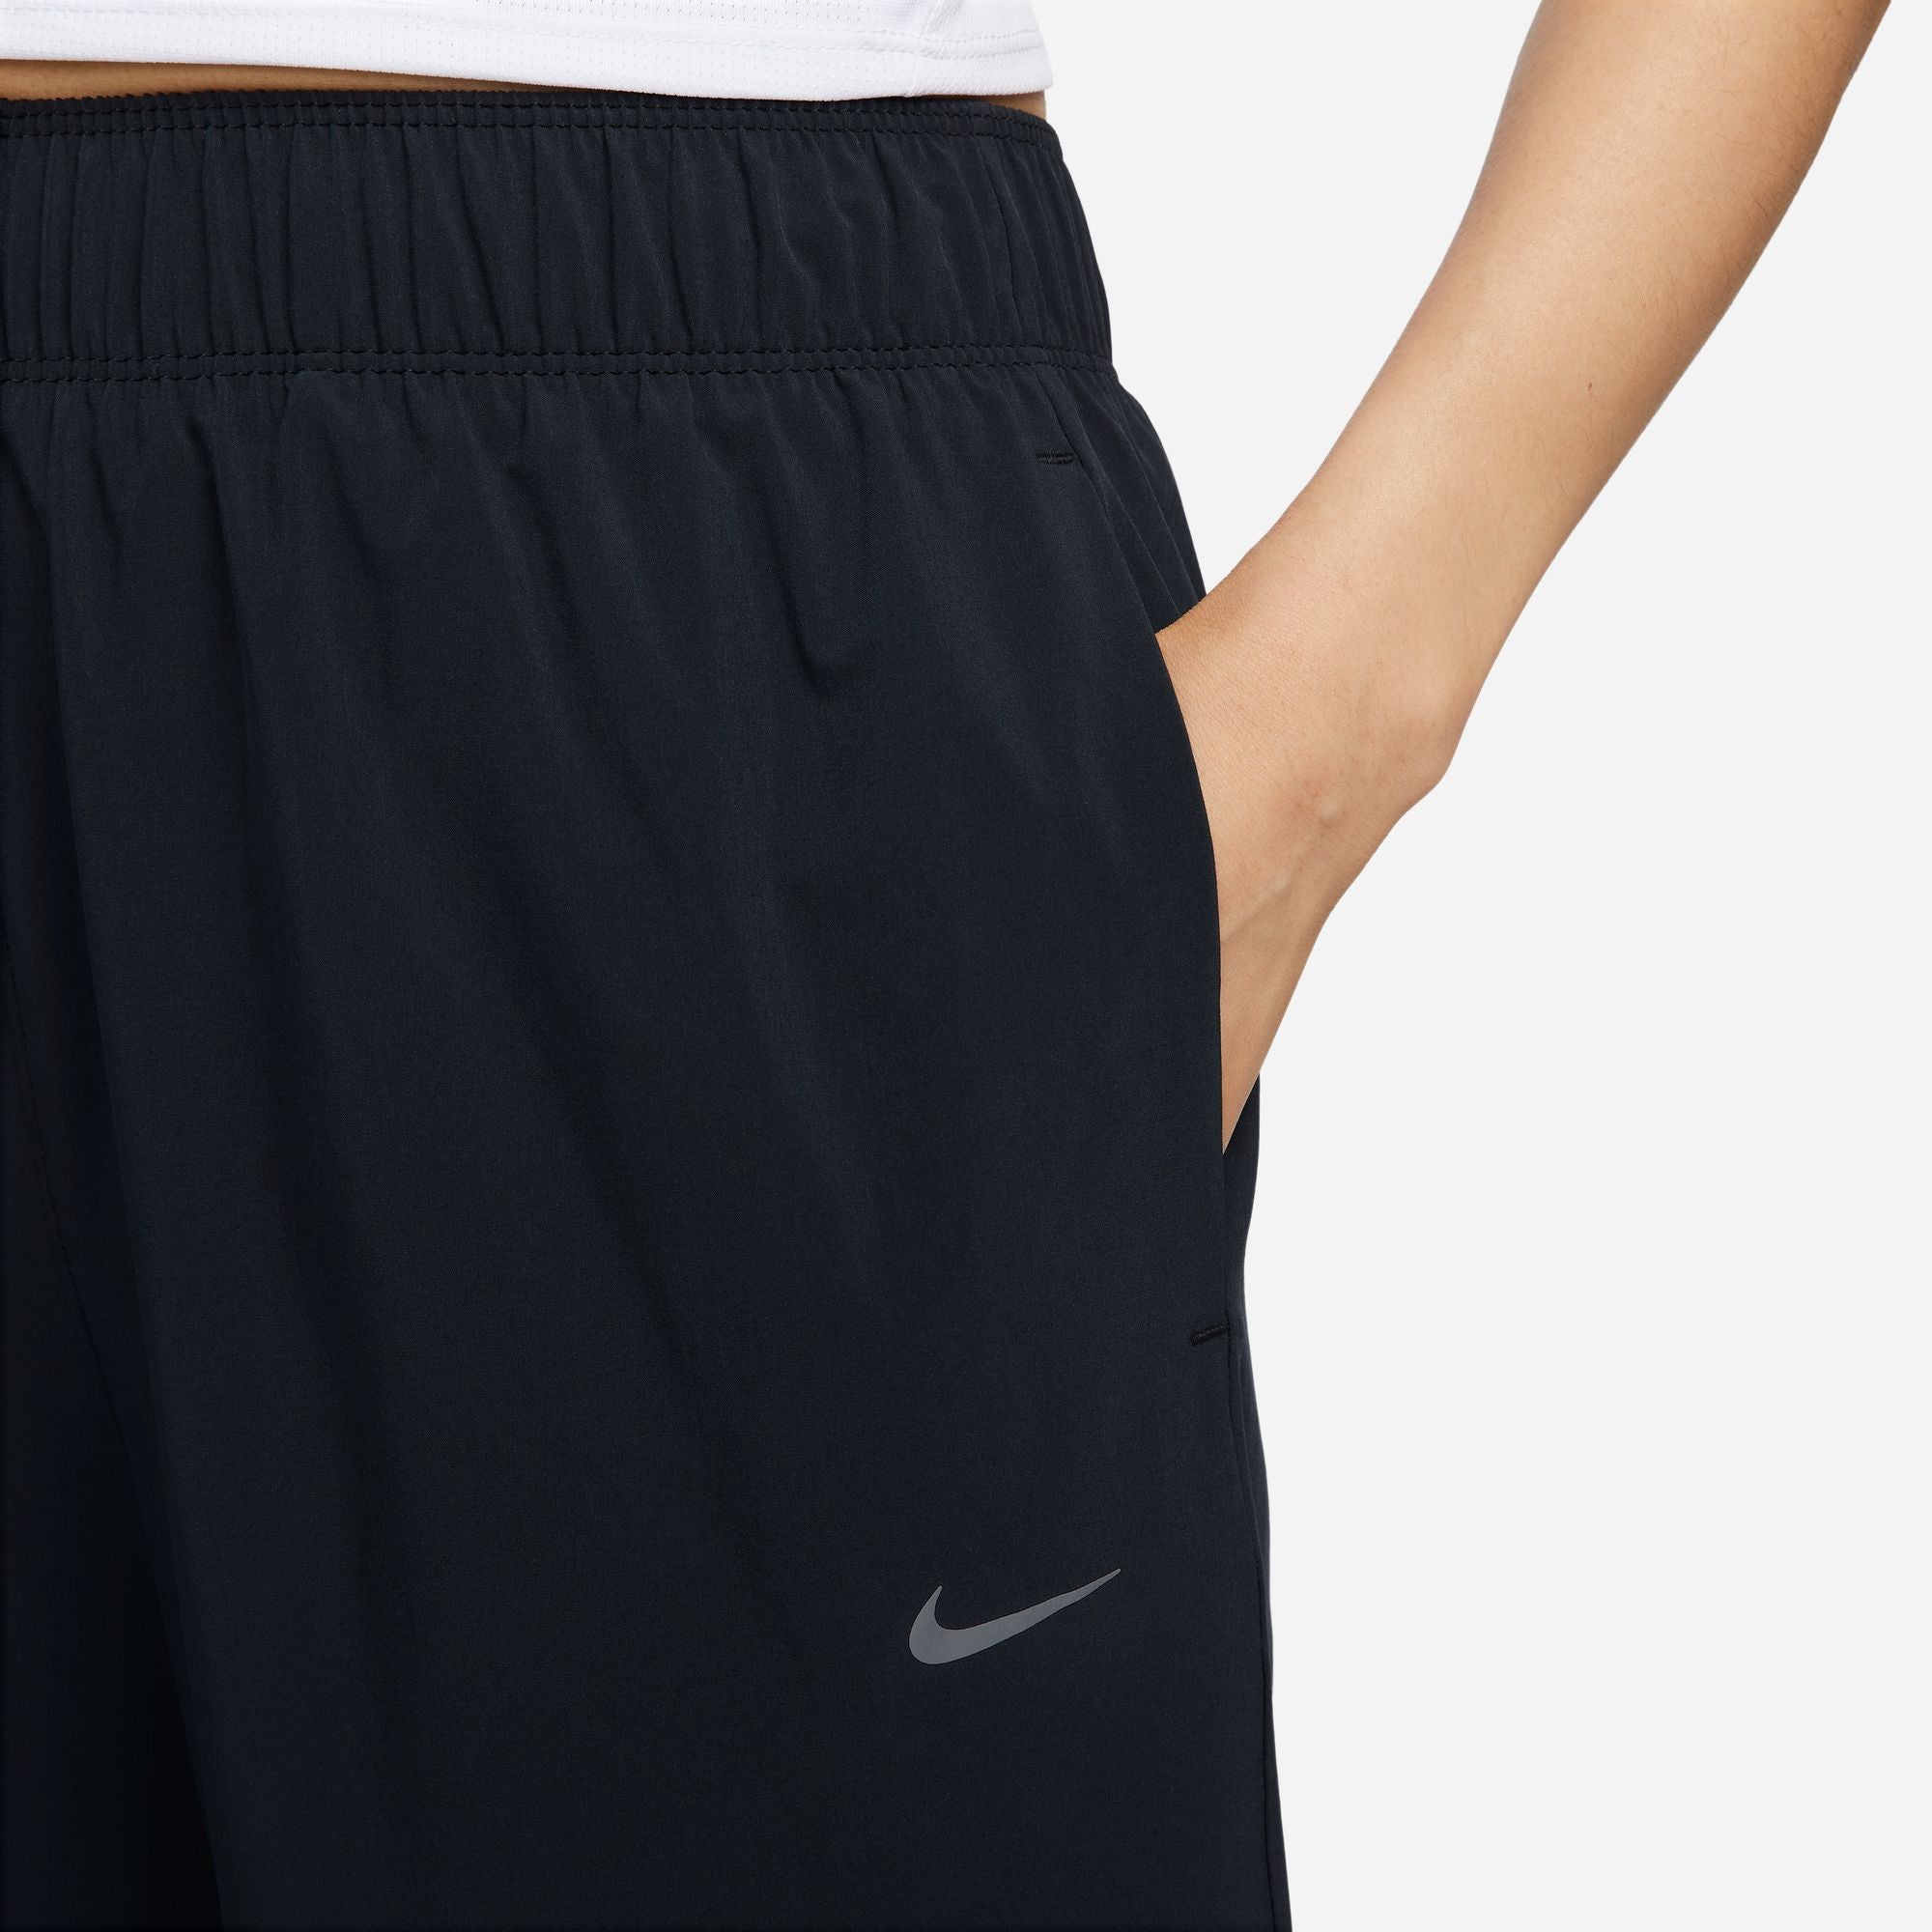 NIKE DRI-FIT FAST WOMEN'S MID-RISE 7/8 RUNNING PANTS BLACK/REFLECTIVE SILV  – Park Outlet Ph